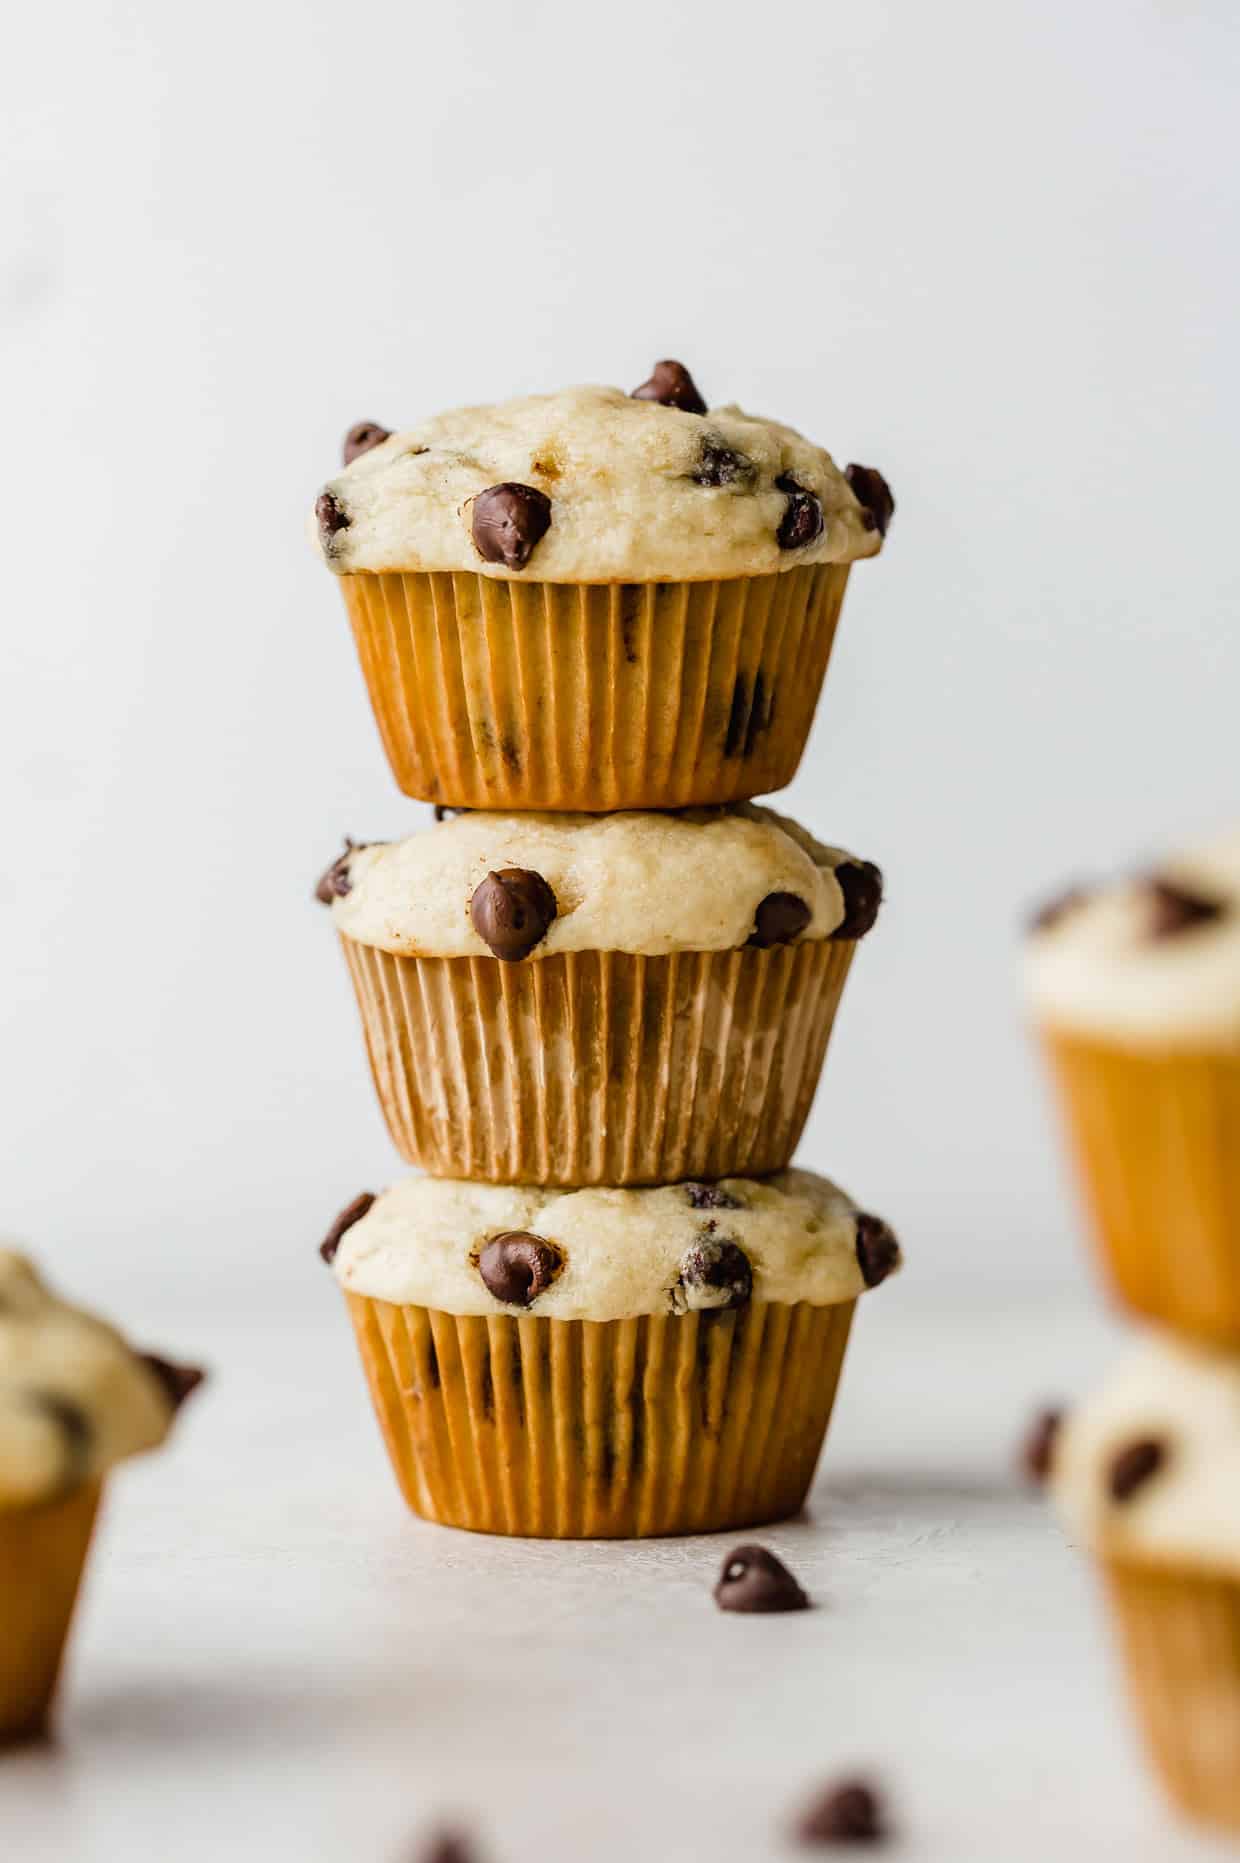 Three Buttermilk Banana Chocolate Chip Muffins stacked on top of each other against a white background.